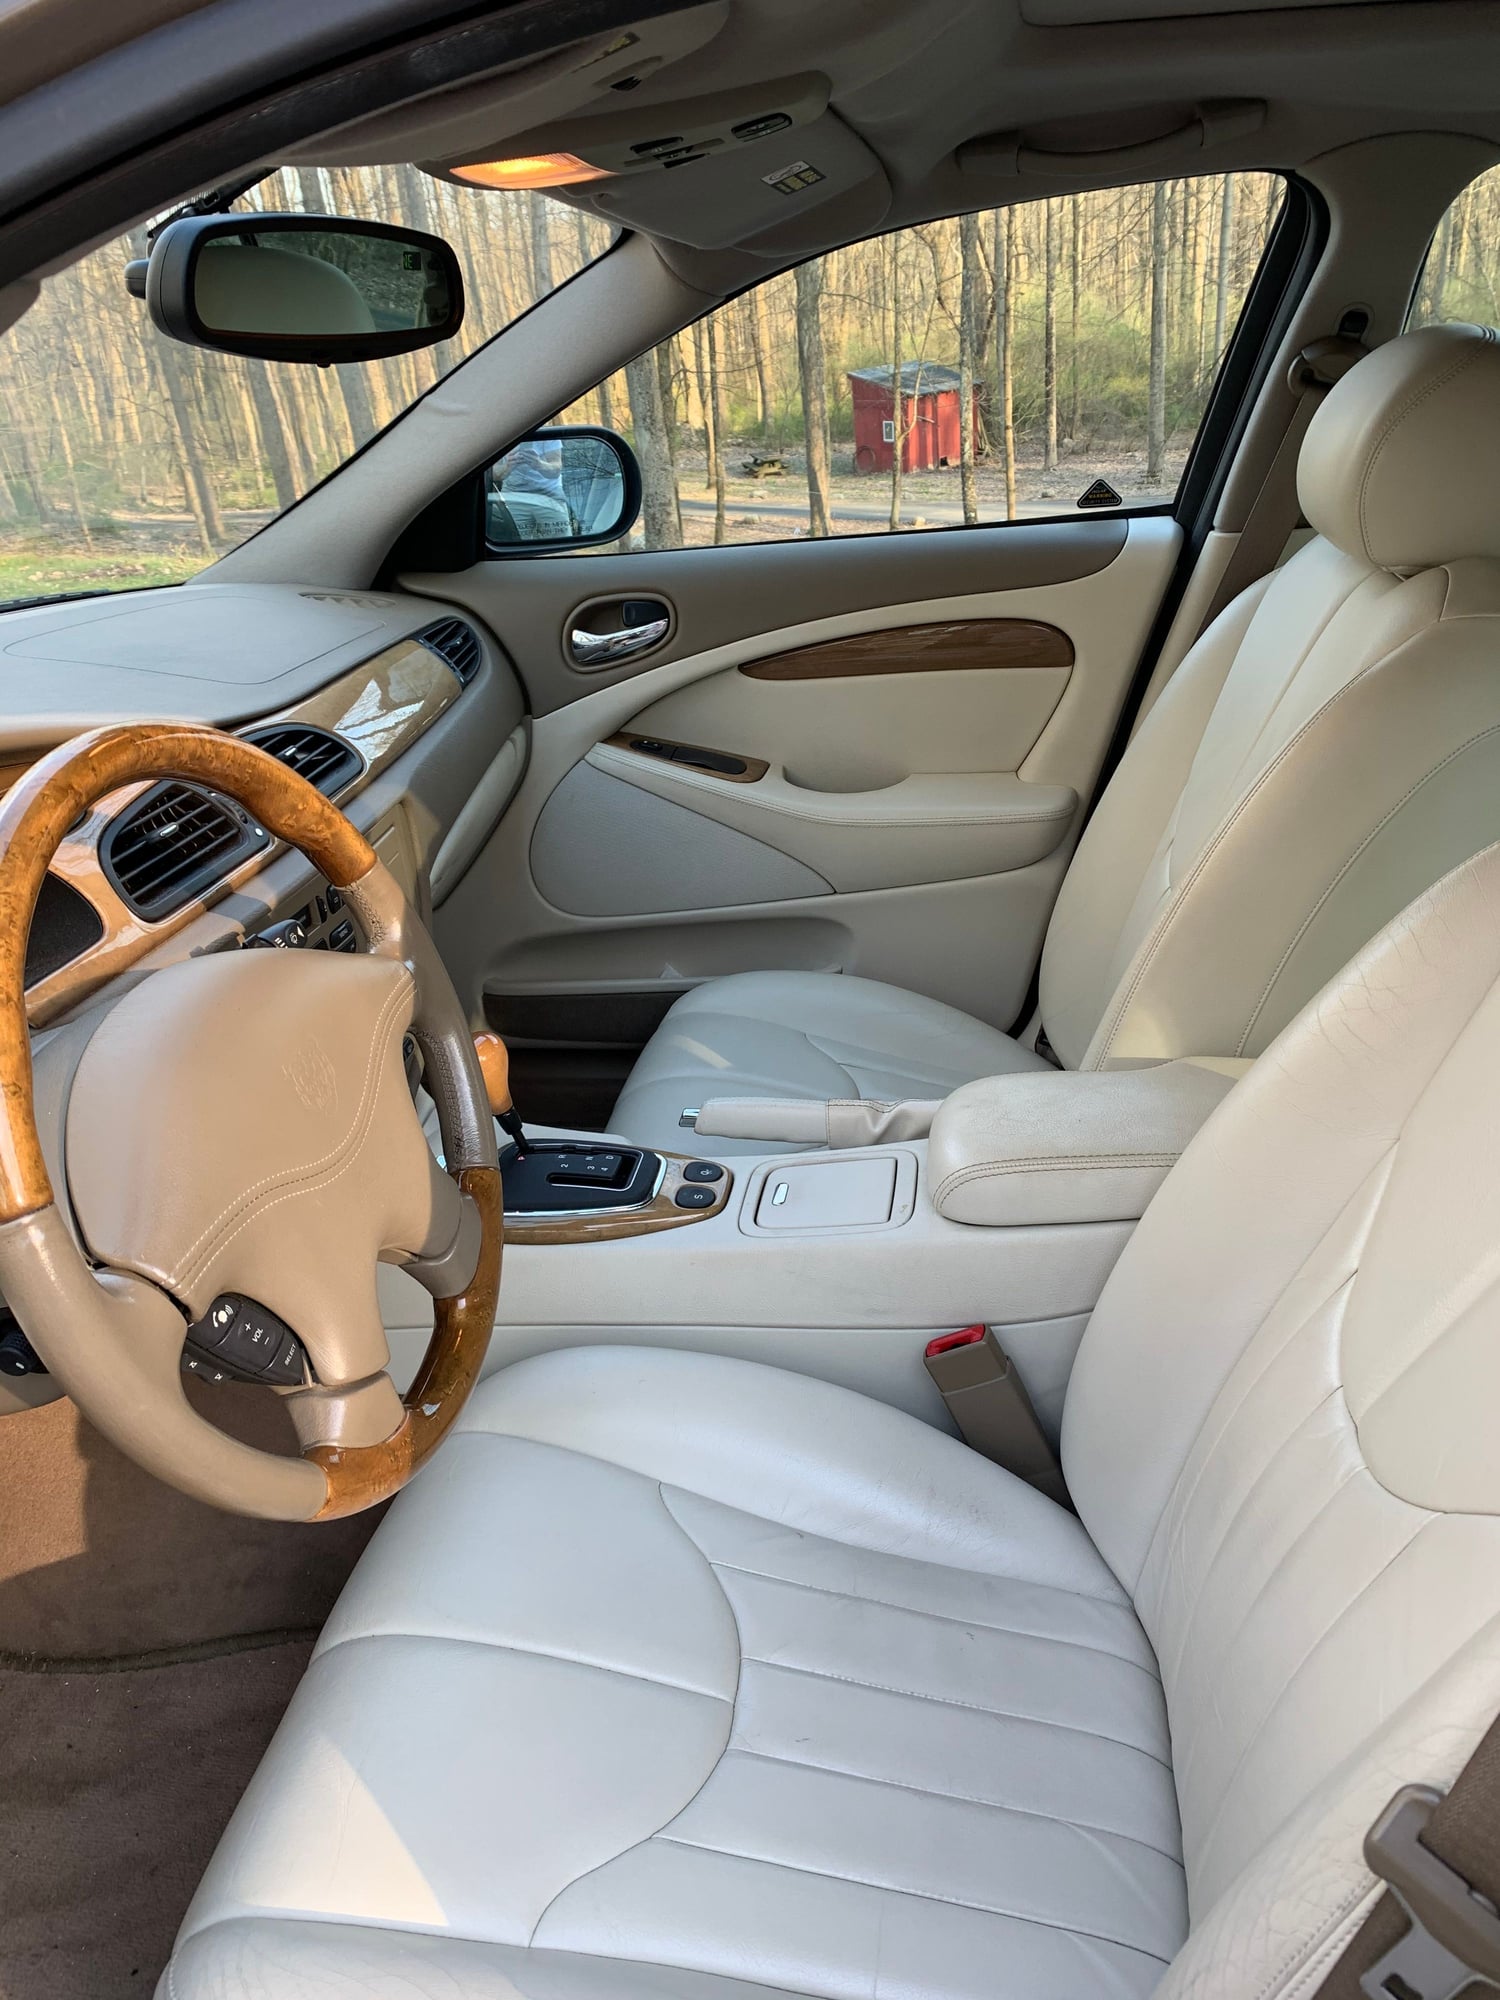 2001 Jaguar S-Type - Excellent Condition 2001 Roman Bronze 3.0 S-type - Used - VIN SAJDA01N01FL94639 - 43,919 Miles - 6 cyl - Automatic - Brown - Upper Mt Bethel, PA 18351, United States